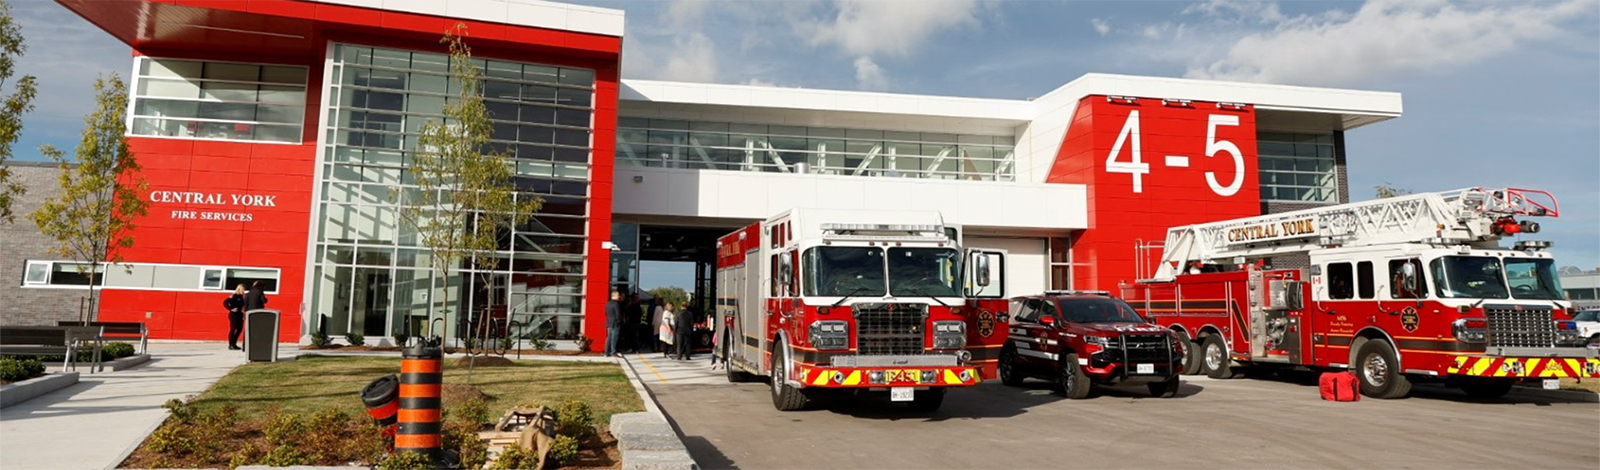 Front of 4-5 fire station with fire trucks in front, on a sunny day